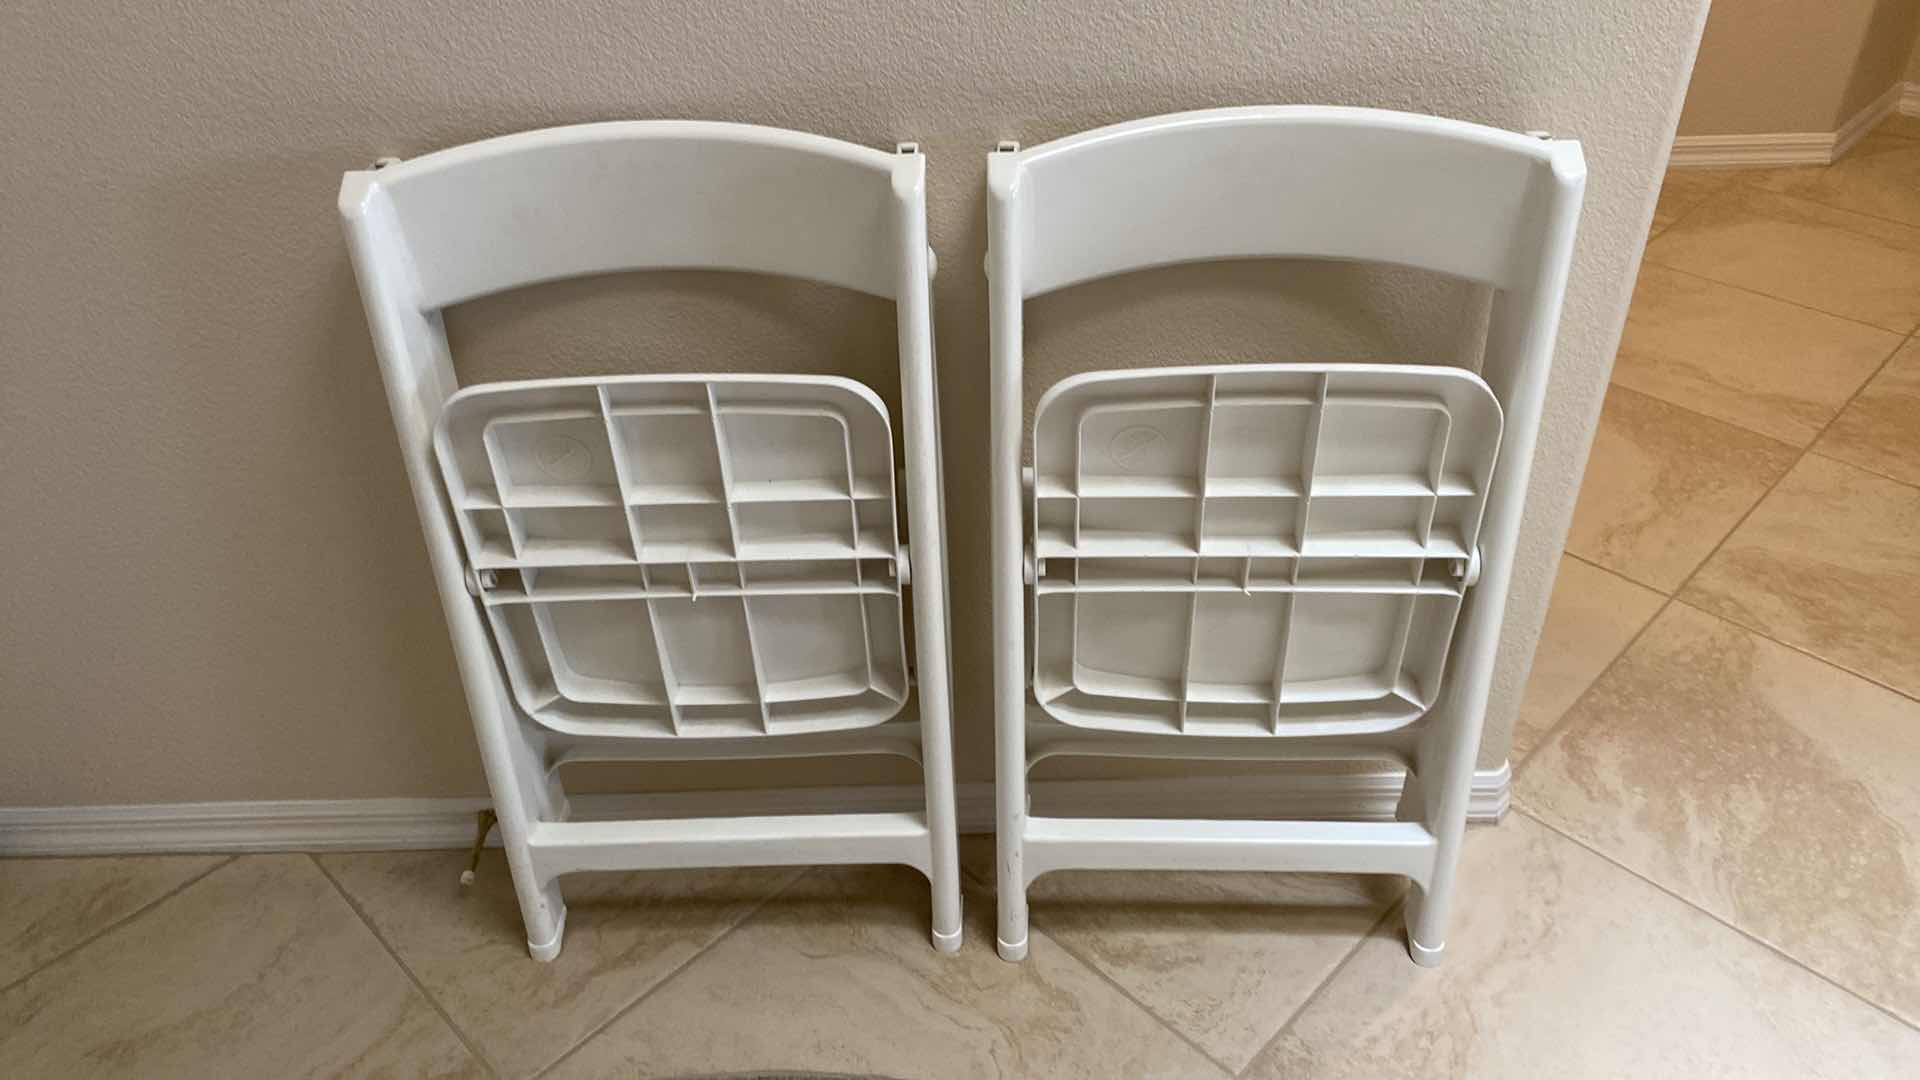 Photo 4 of PAIR OF PLASTIC FOLDING CHAIRS